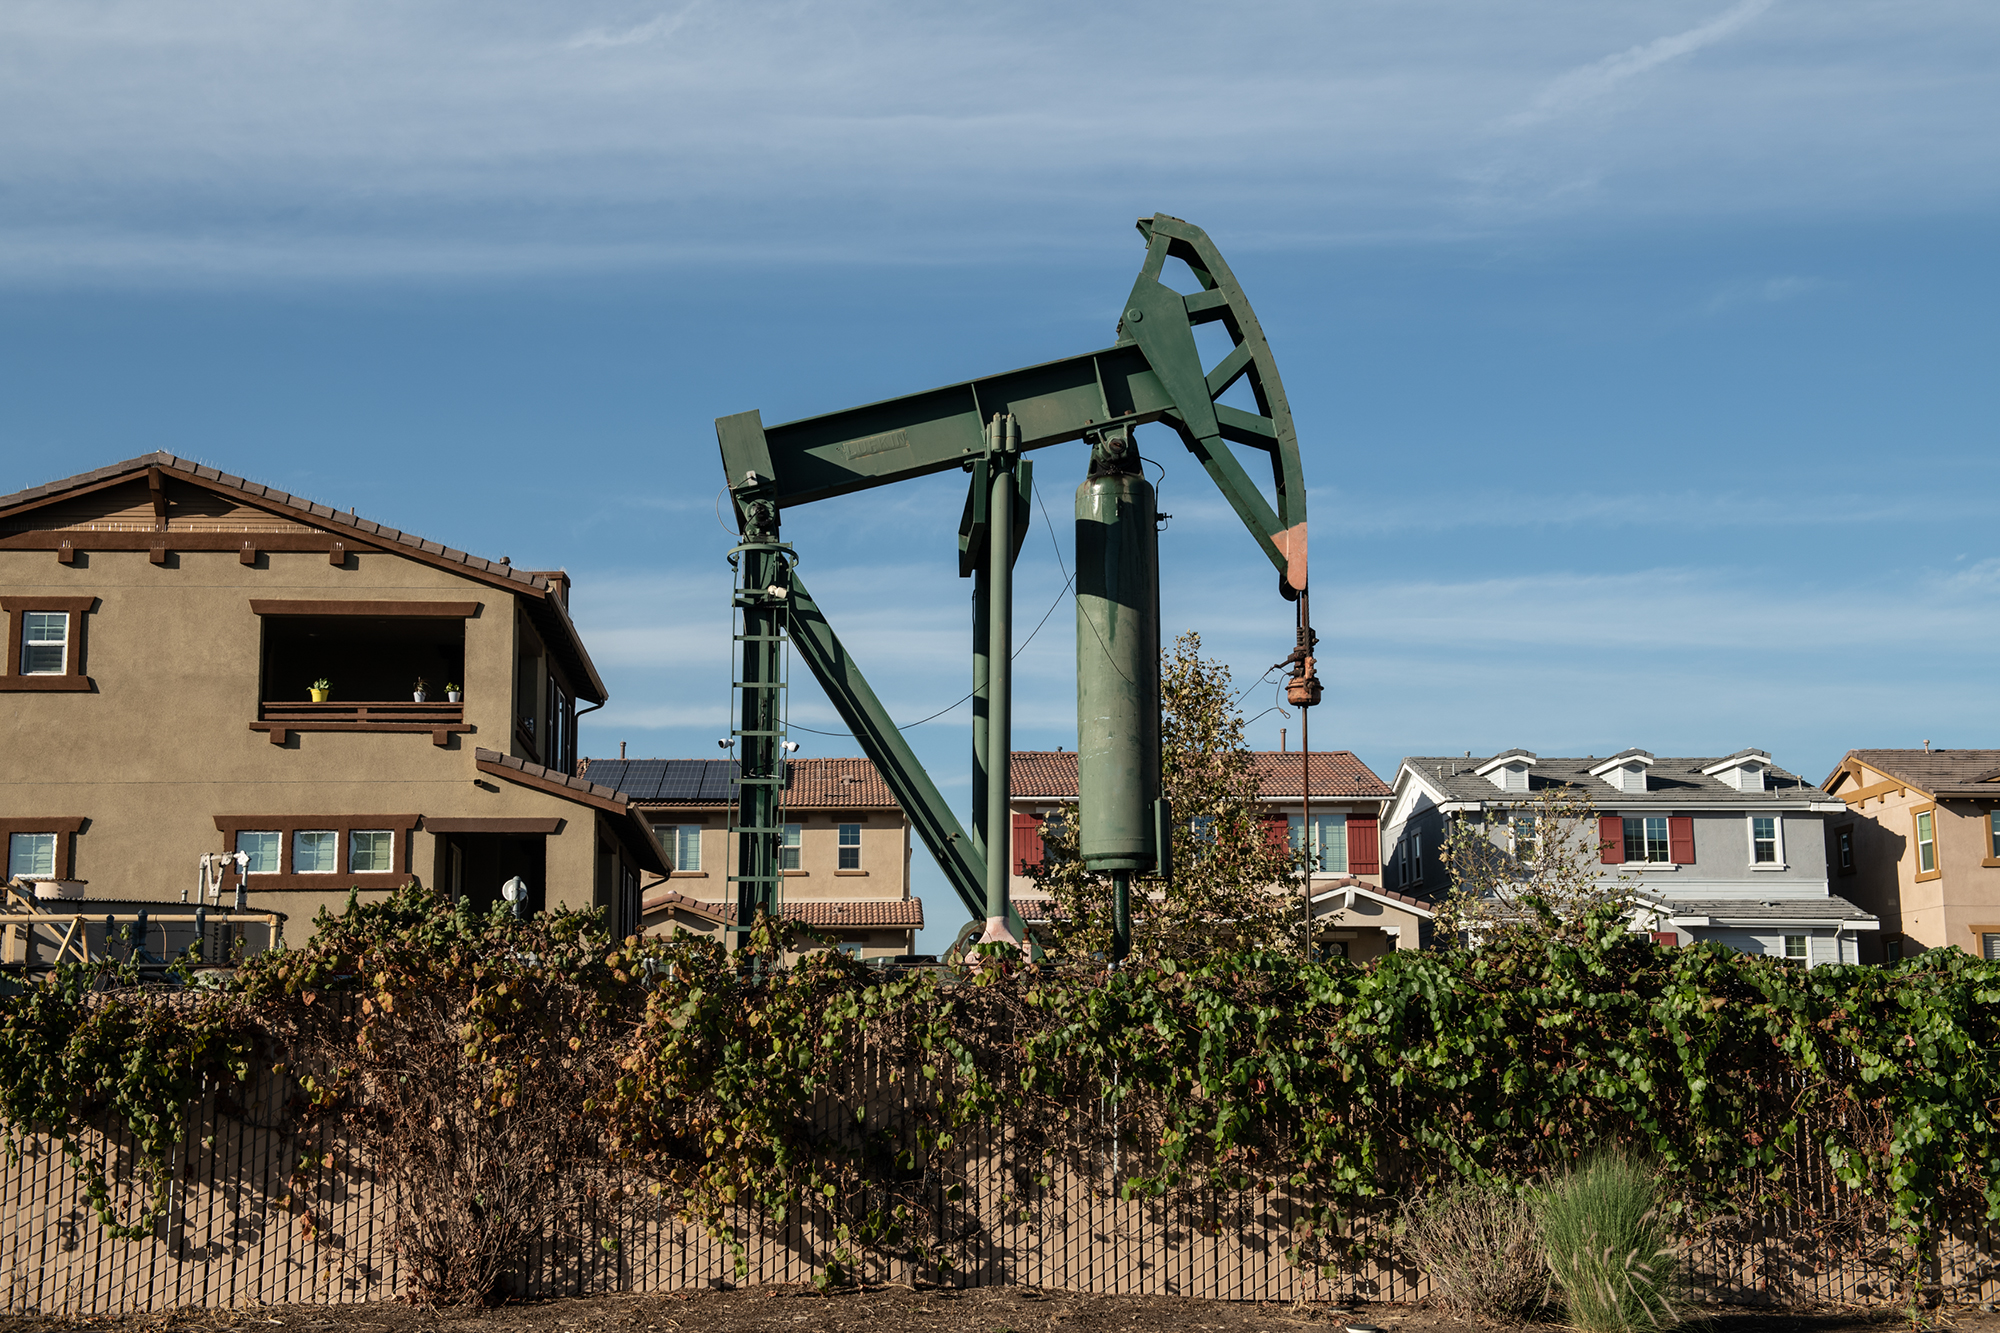 An active pump jack near homes in the city of Signal Hill in Los Angeles County on Oct. 19, 2022. Gov. Gavin Newsom signed Senate Bill 1137 in September this year, which bans new oil and gas wells within 3,200 feet of homes and schools. The bill is an effort to protect public health. Oil industries have have failed to defeat the buffer-zone bill in the Legislature, filing a petition in October to put a referendum on the 2024 ballot to overturn SB 1137. Photo by Pablo Unzueta